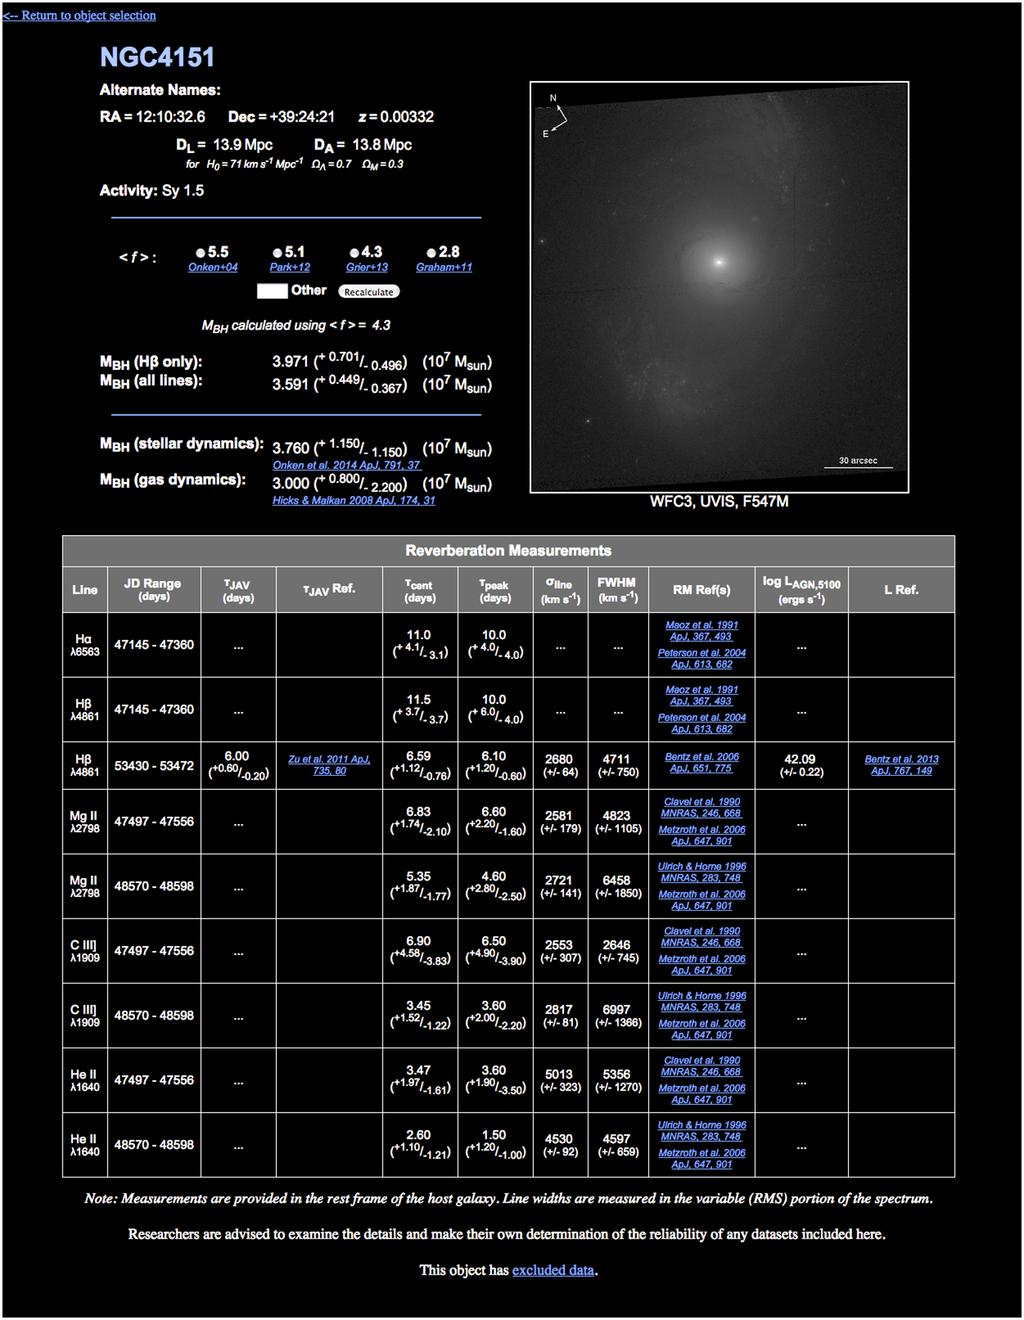 AGN BLACK HOLE MASS DATABASE 71 FIG. 2. The detailed page for an individual object, in this case, NGC 4151.